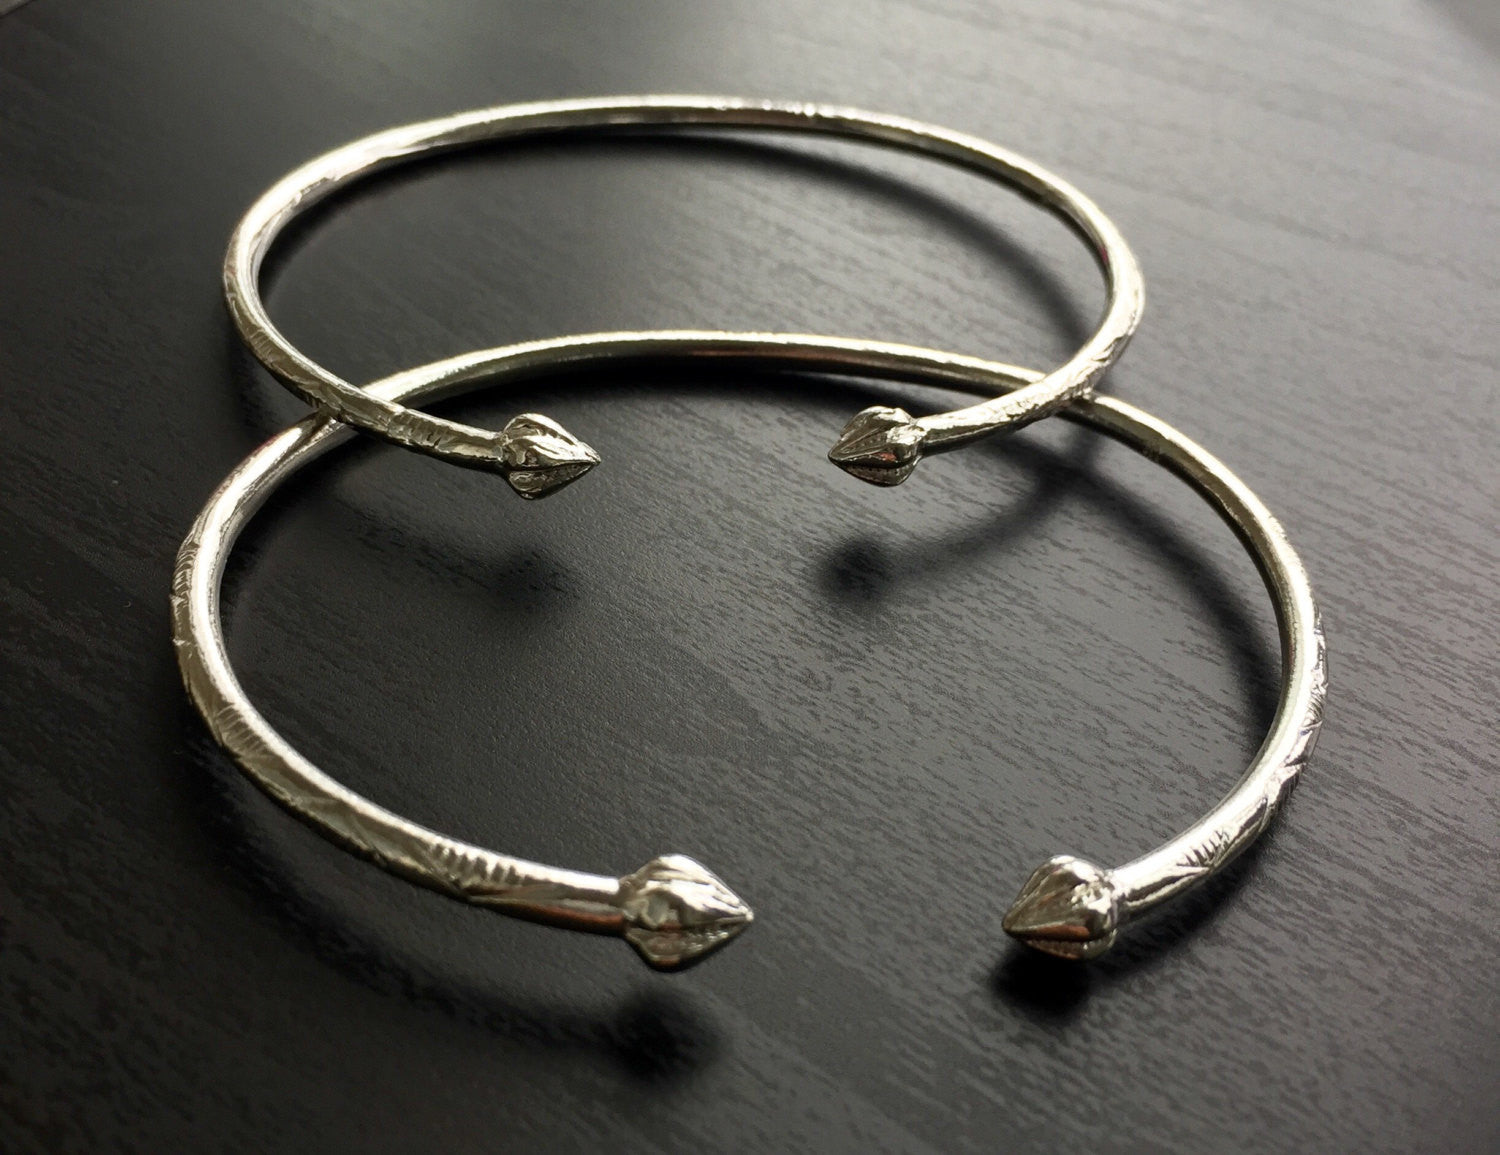 Pointy Bulb .925 Sterling Silver West Indian Bangles (Pair) 7.5 inches (Made in Usa) - Betterjewelry